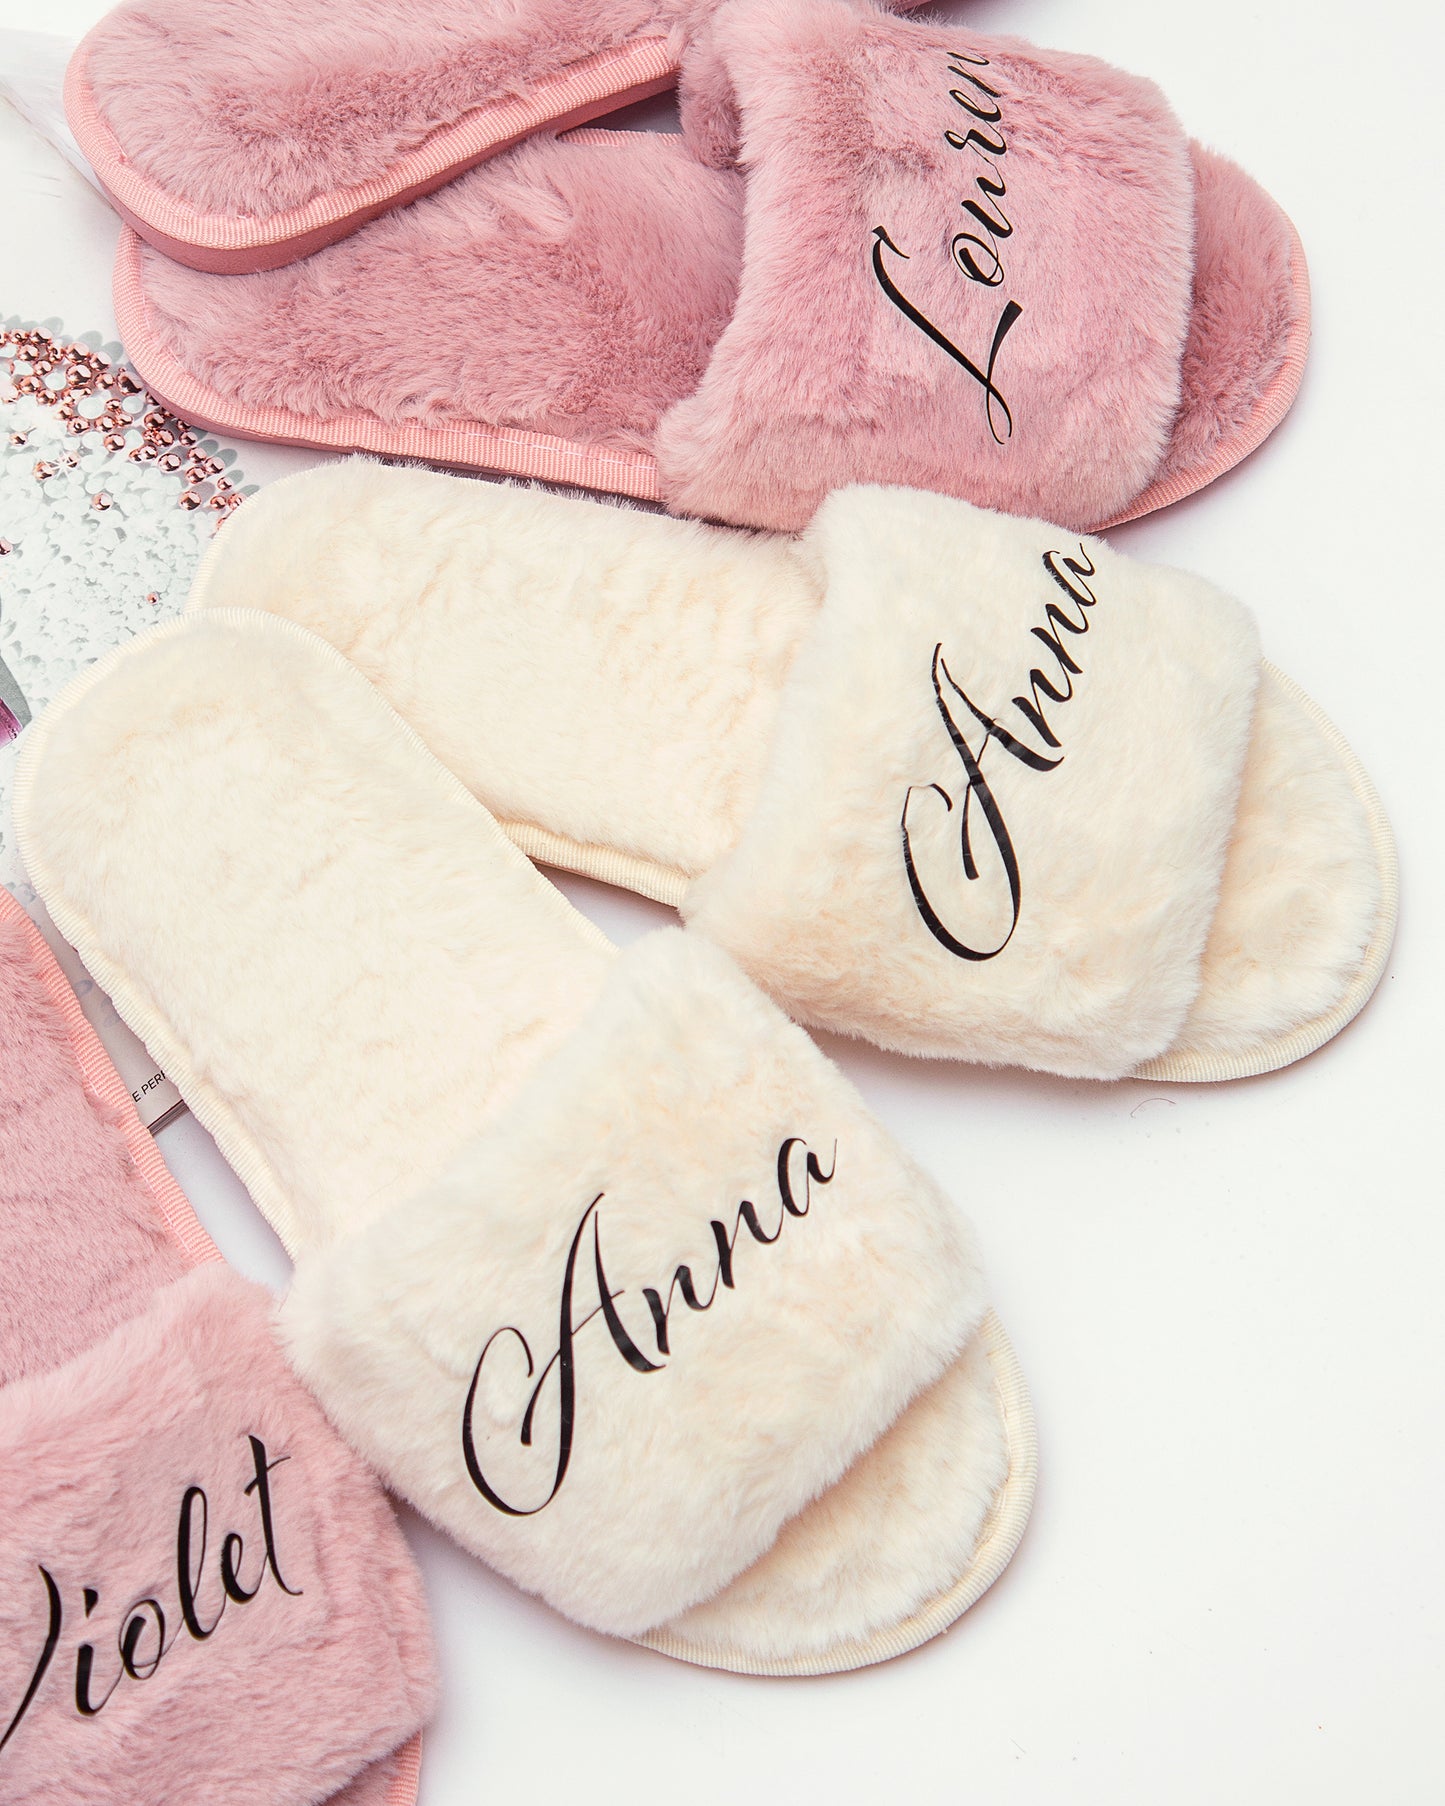 Personalized Fluffy Slippers